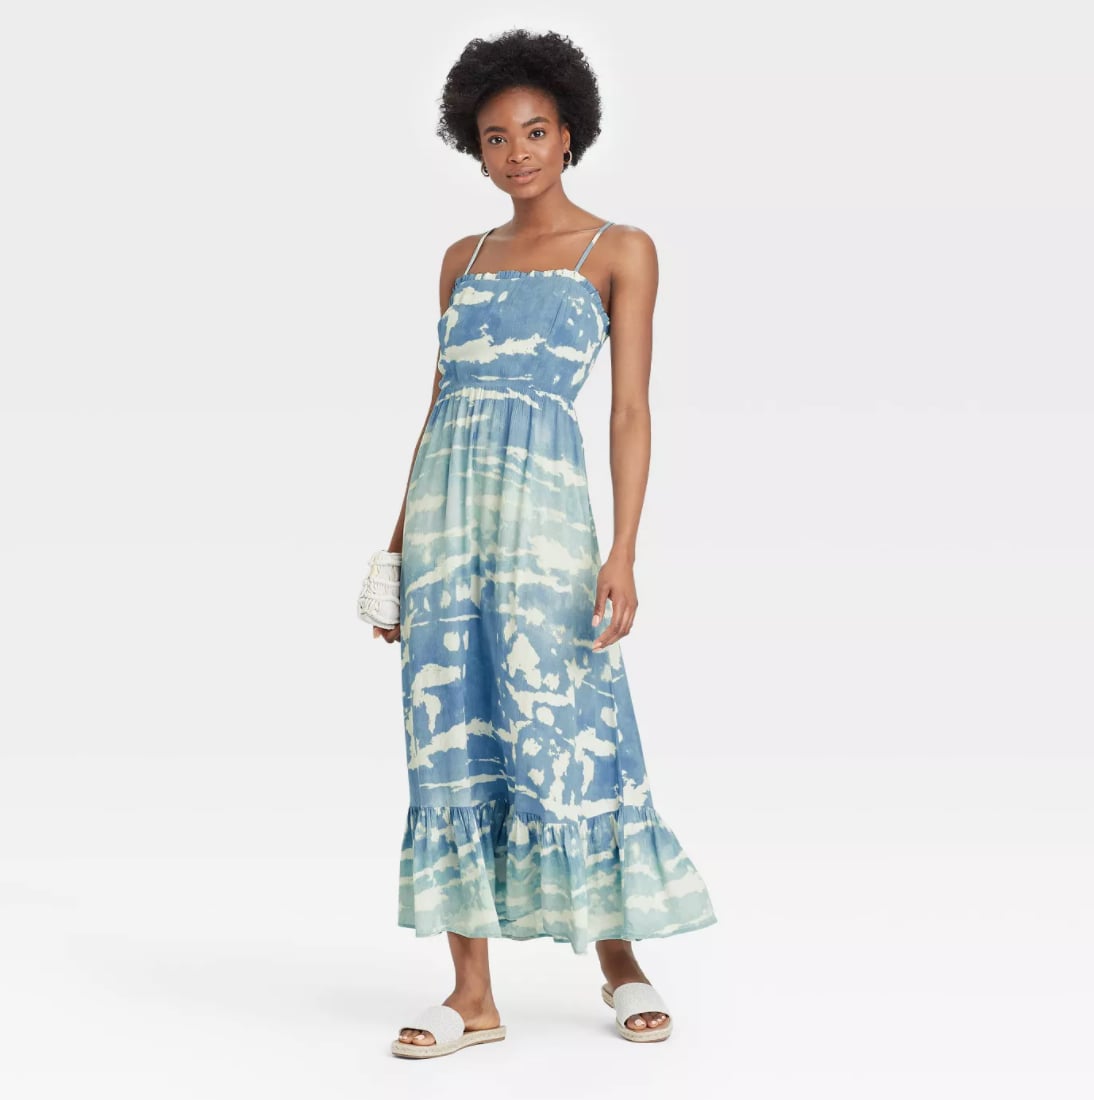 Knox Rose Sleeveless Tiered Dress in Blue, For the Days I Feel Like Being  Comfy, I Wear This $35 Target Dress